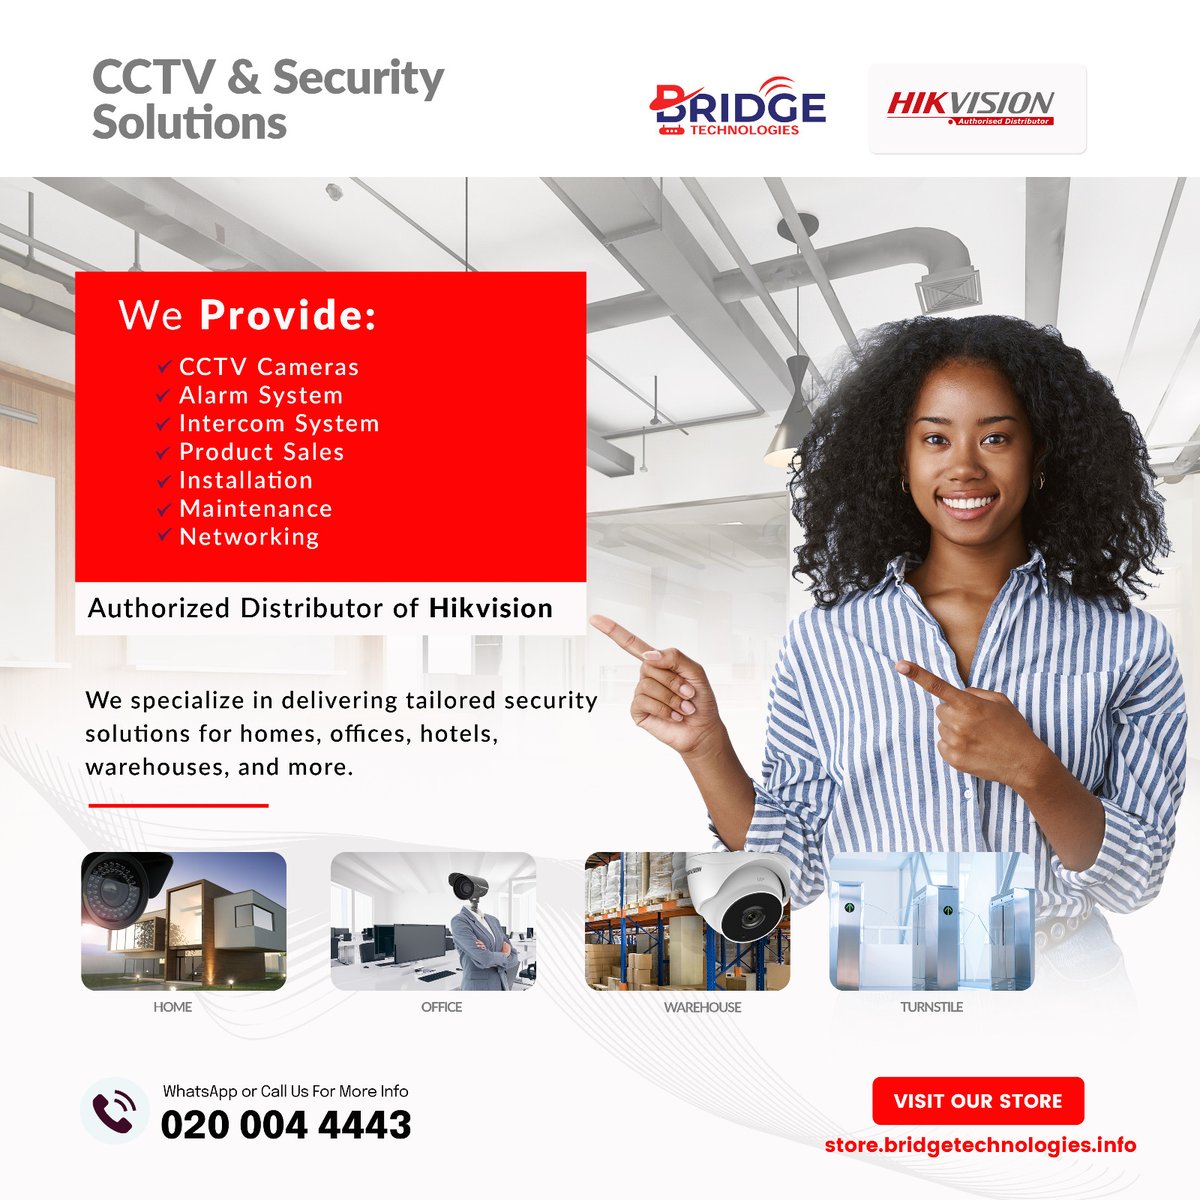 Secure your property with us!  As an authorized distributor of Hikvision, we offer a wide range of CCTV cameras, alarm systems, intercoms, networking solutions, and more. 

Contact us today to discuss your security needs! #BridgeTechnologies #Hikvision #CCTV #Camera